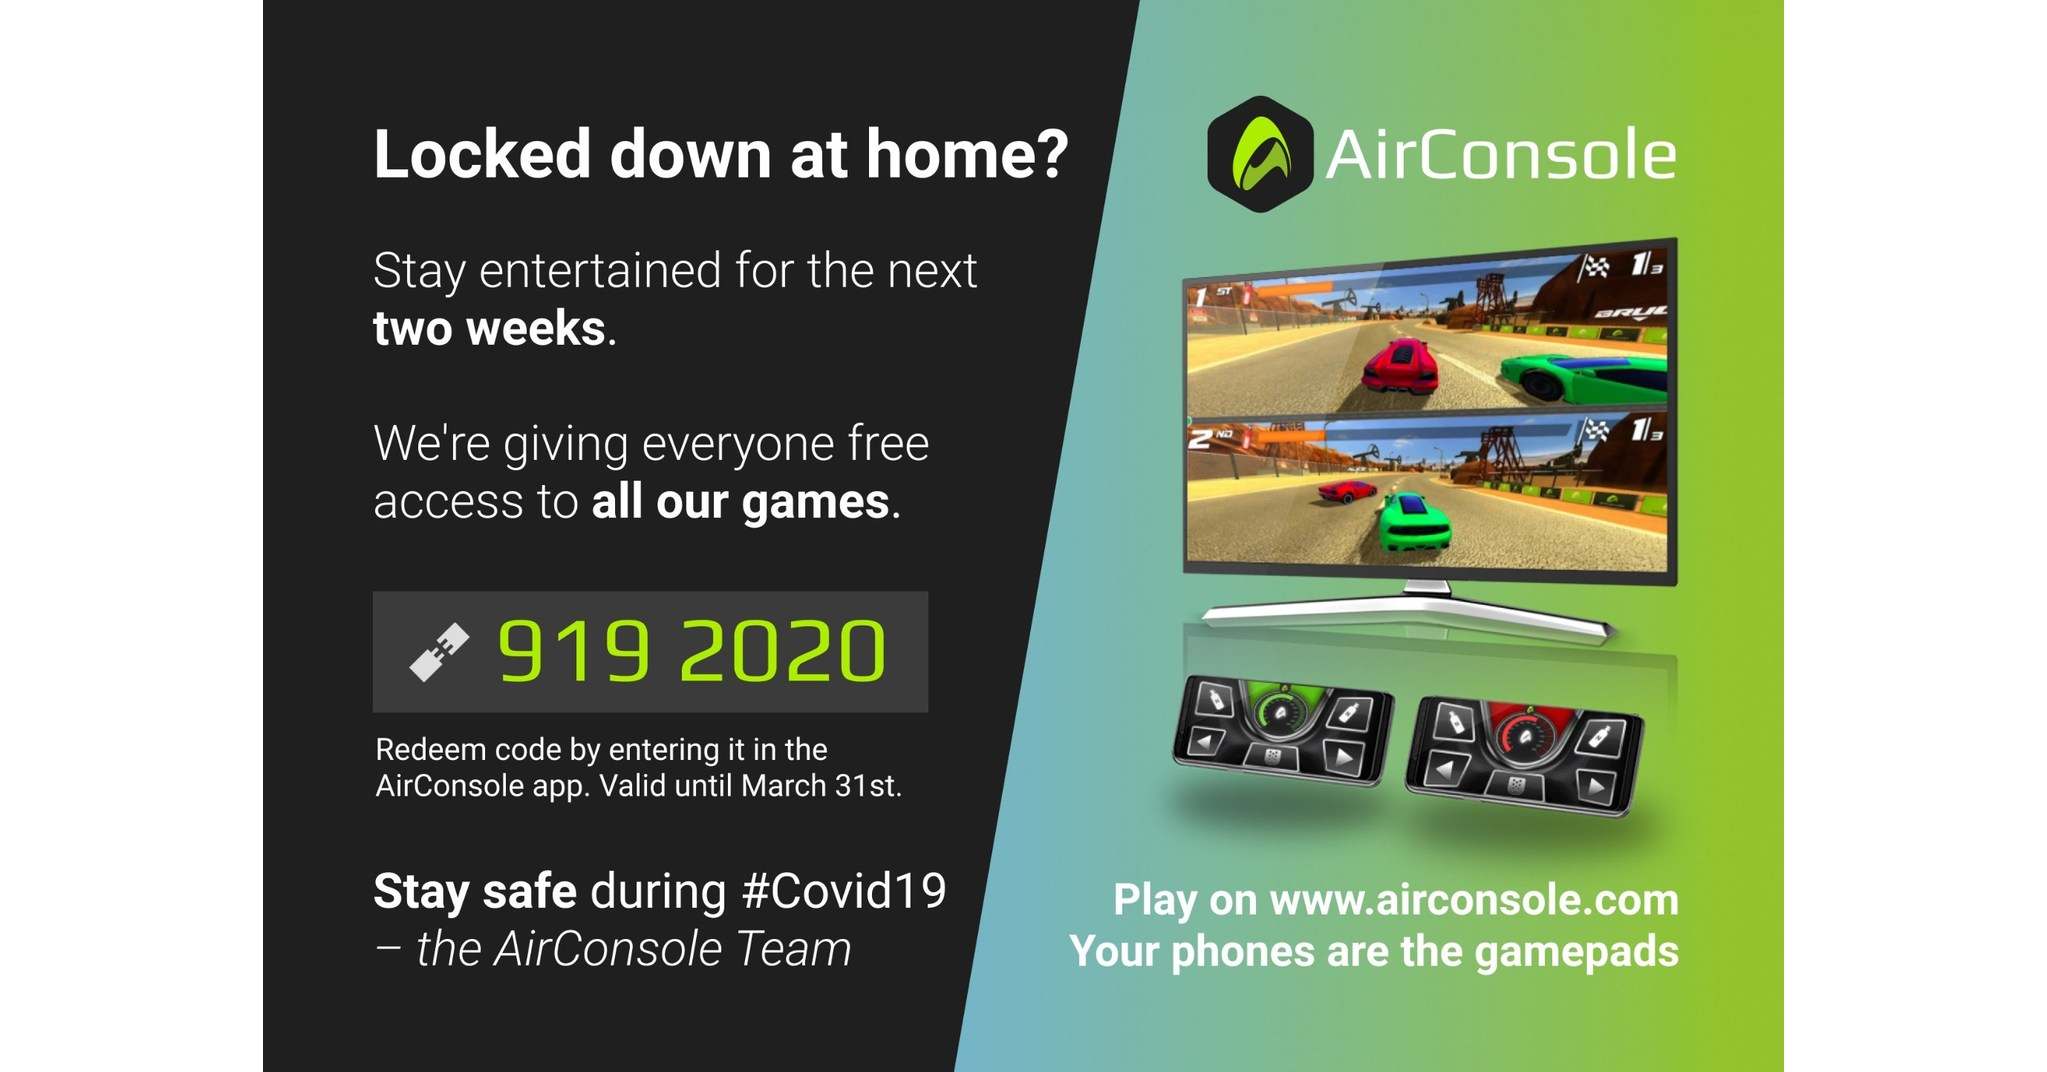 AirConsole Is Giving Everyone Free Access to All of Their Video Games During Covid-19 Lockdowns 